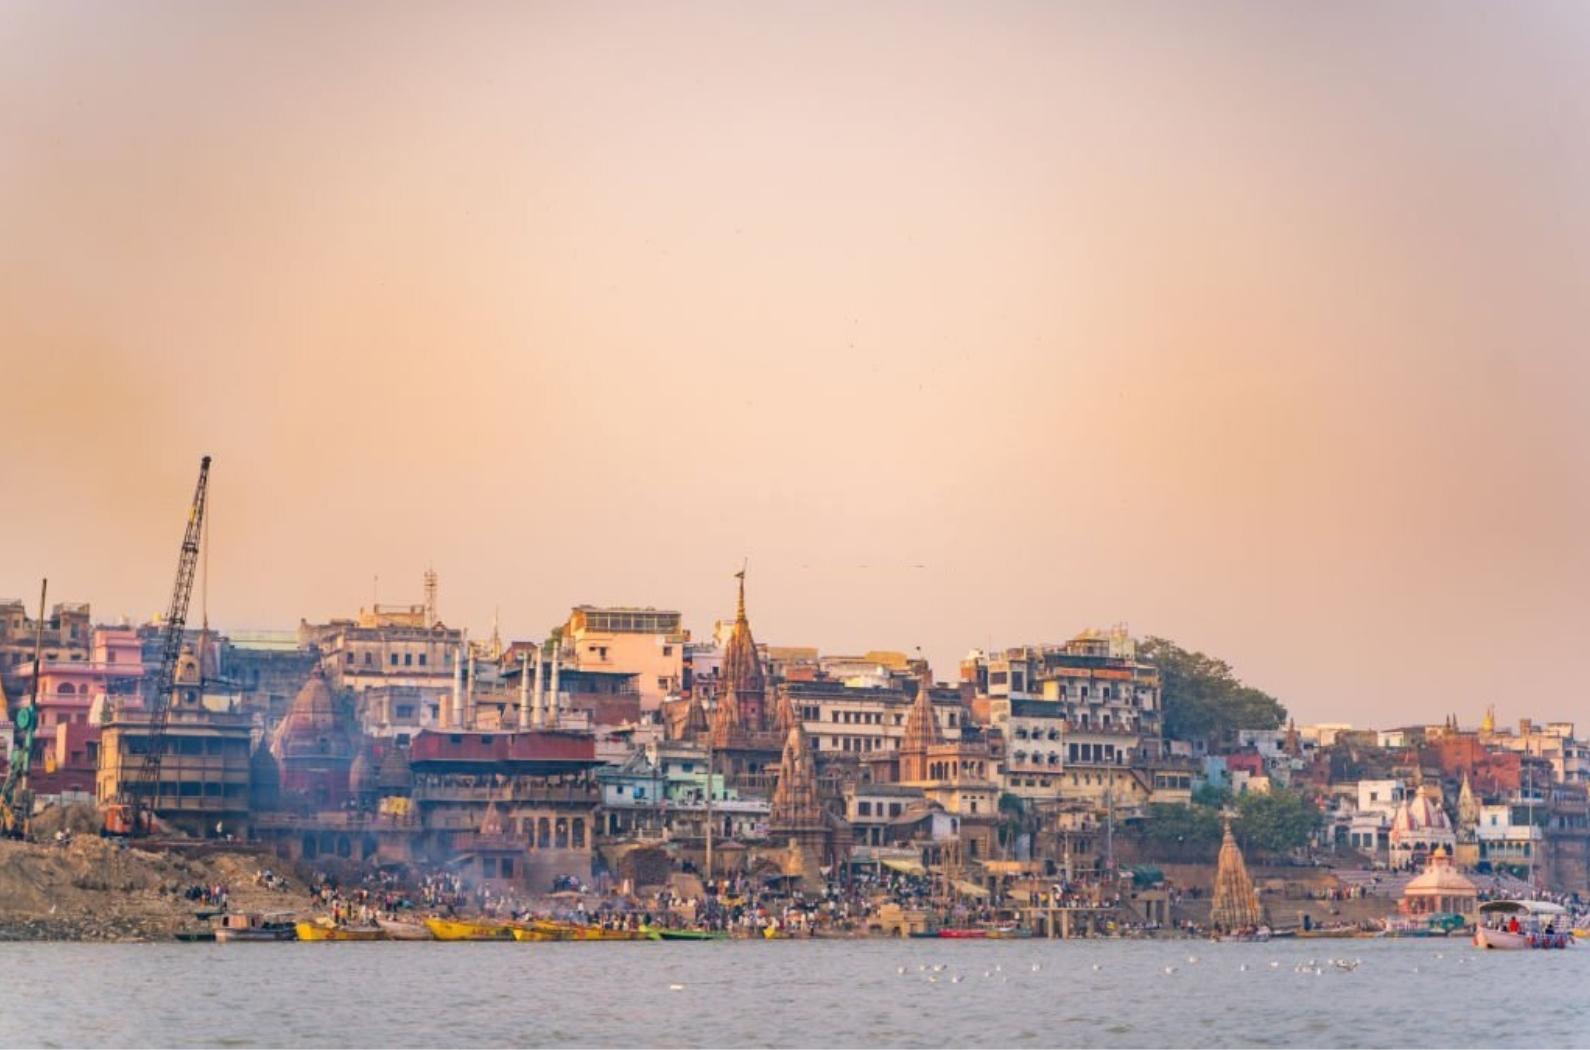 Ancient Varanasi city architecture with Assi Ghat